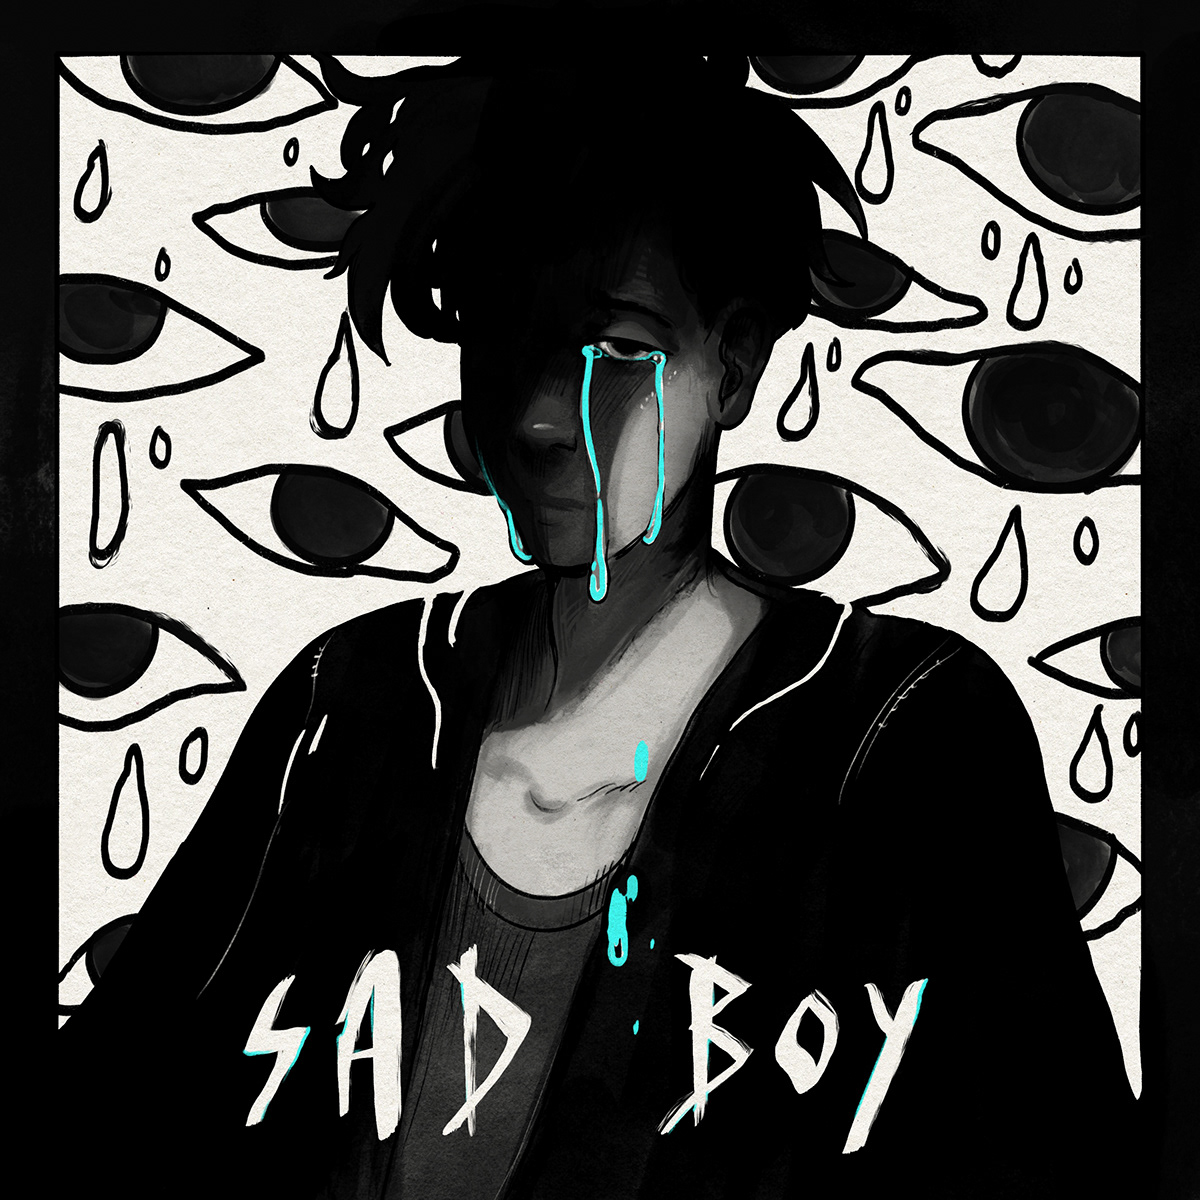 Sad Boy Cover + Visualizers on Behance